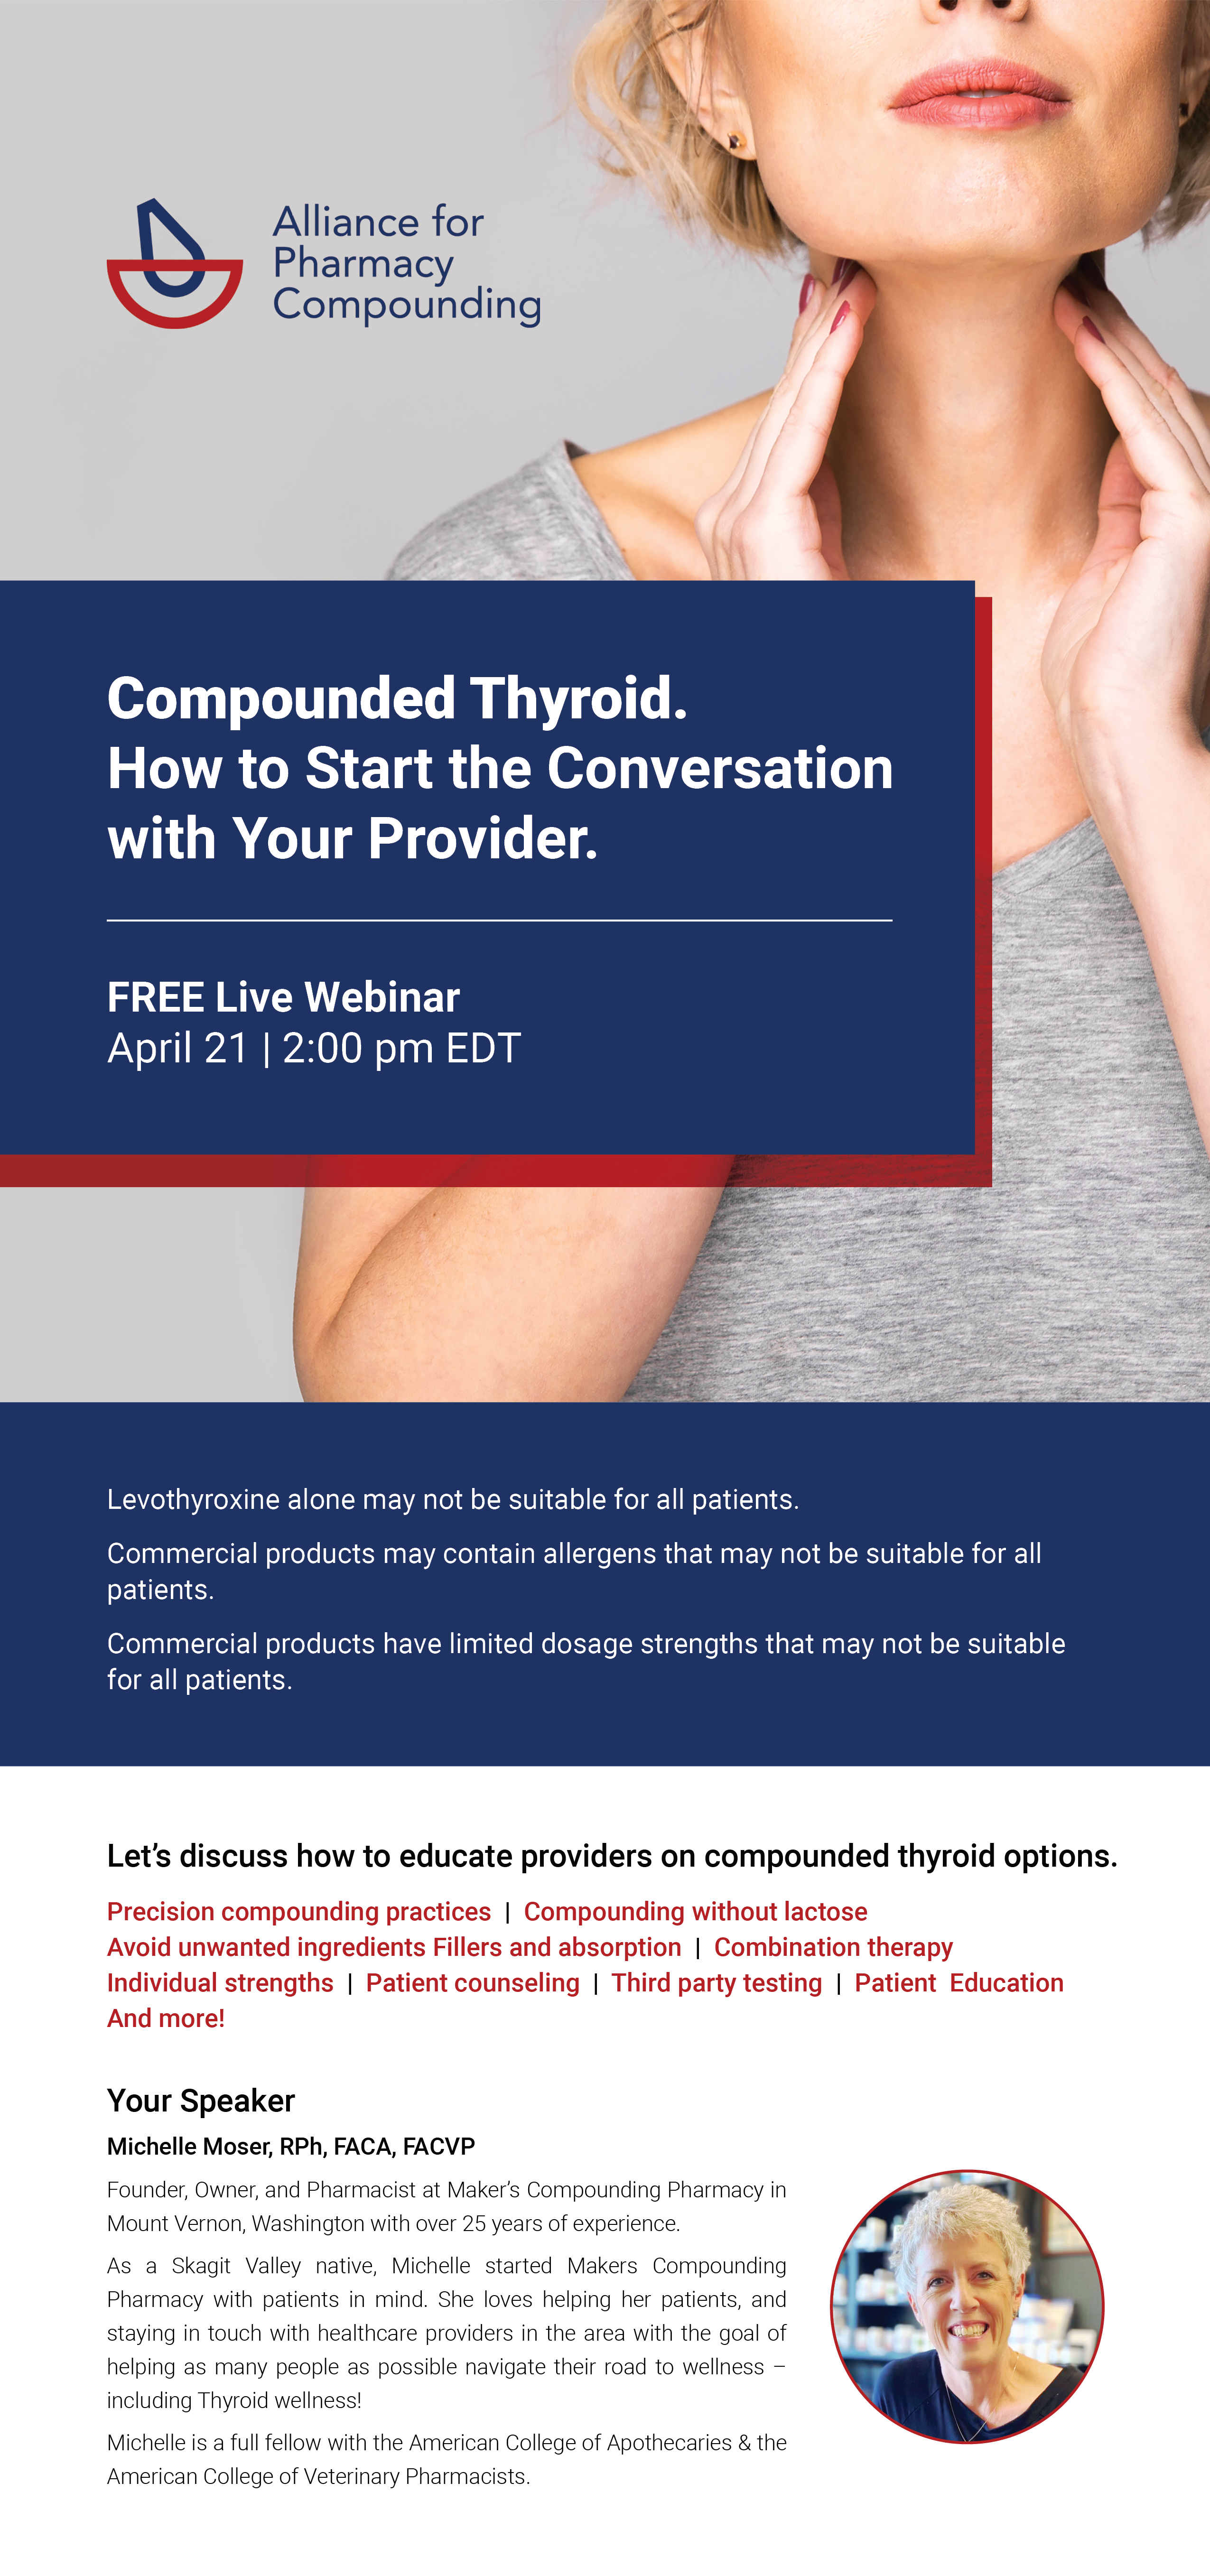 Alliance for Pharmacy Compounding LP3 Network Compounded Thyroid Webinar How to Start the Conversation with Your Provider.